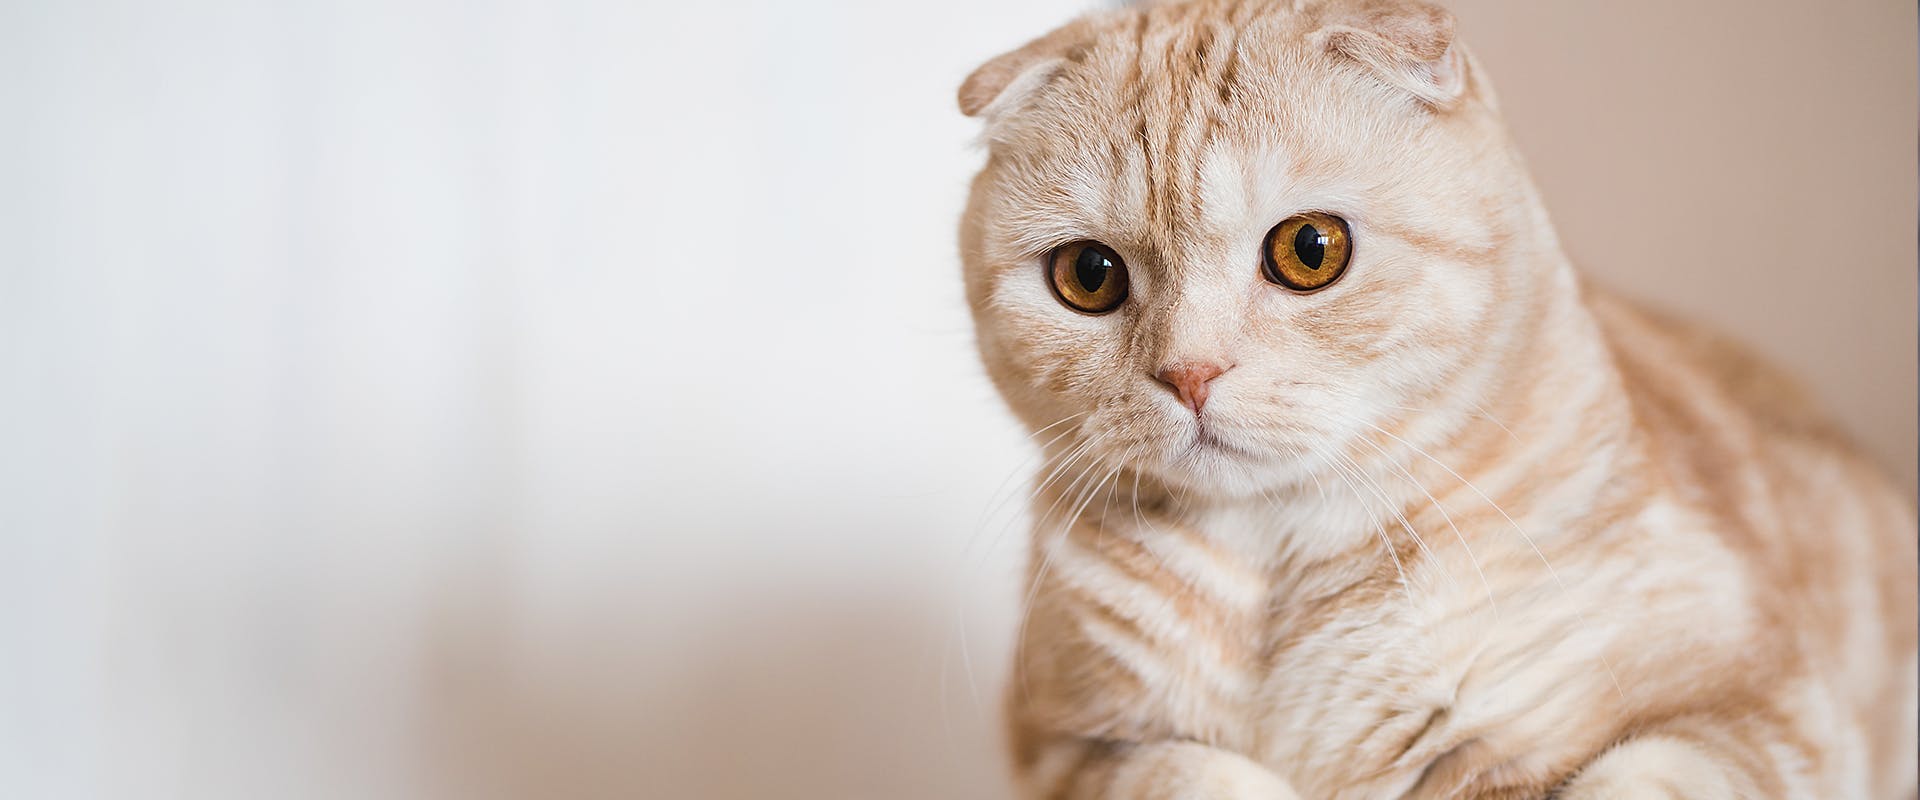 A Scottish Fold, an affectionate cat breed